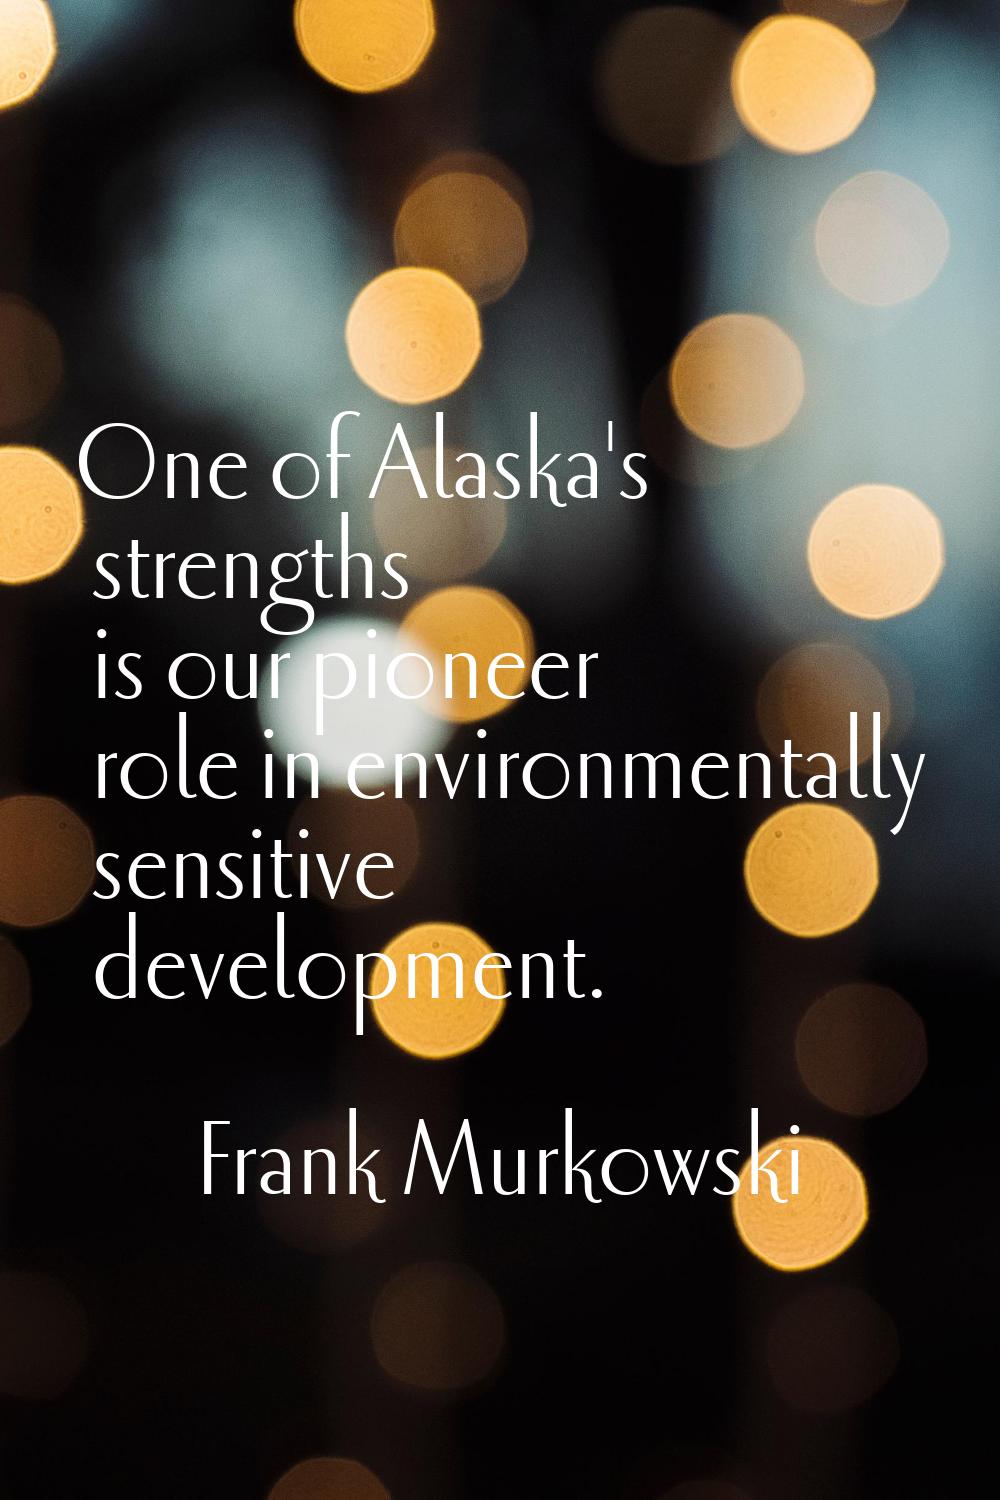 One of Alaska's strengths is our pioneer role in environmentally sensitive development.